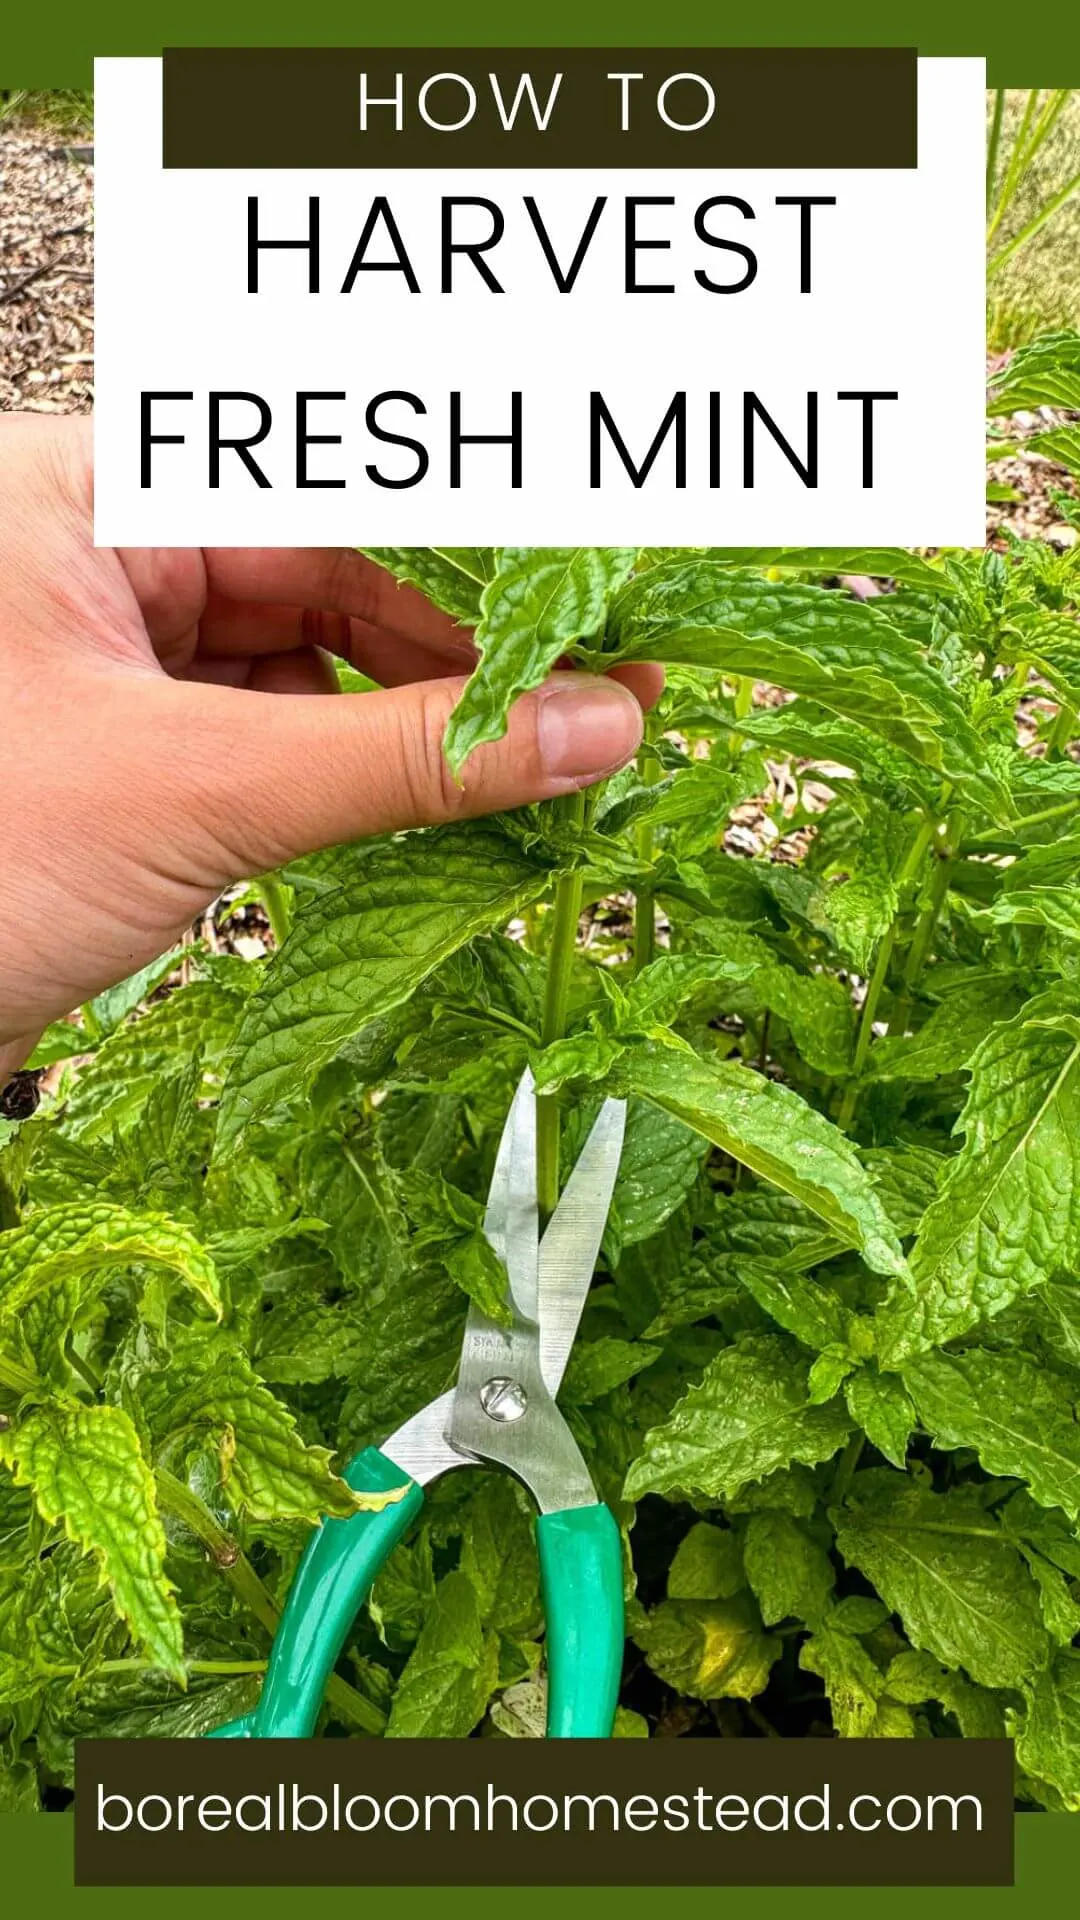 Pinterest graphic text overlay: how to harvest fresh mint.
